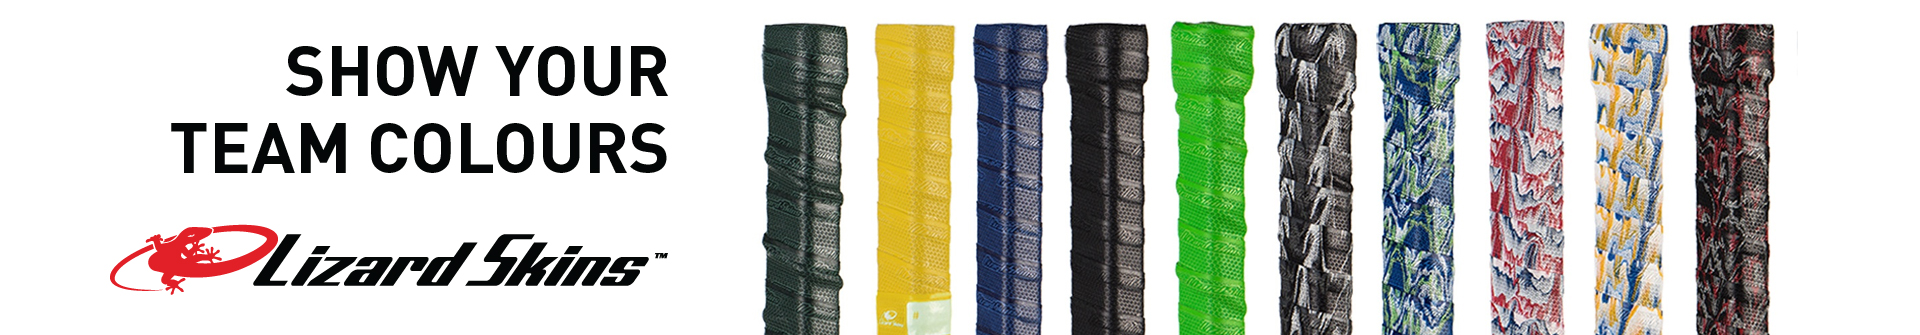 Find Lizard Skins Bat Grips available for sale at Source For Sports